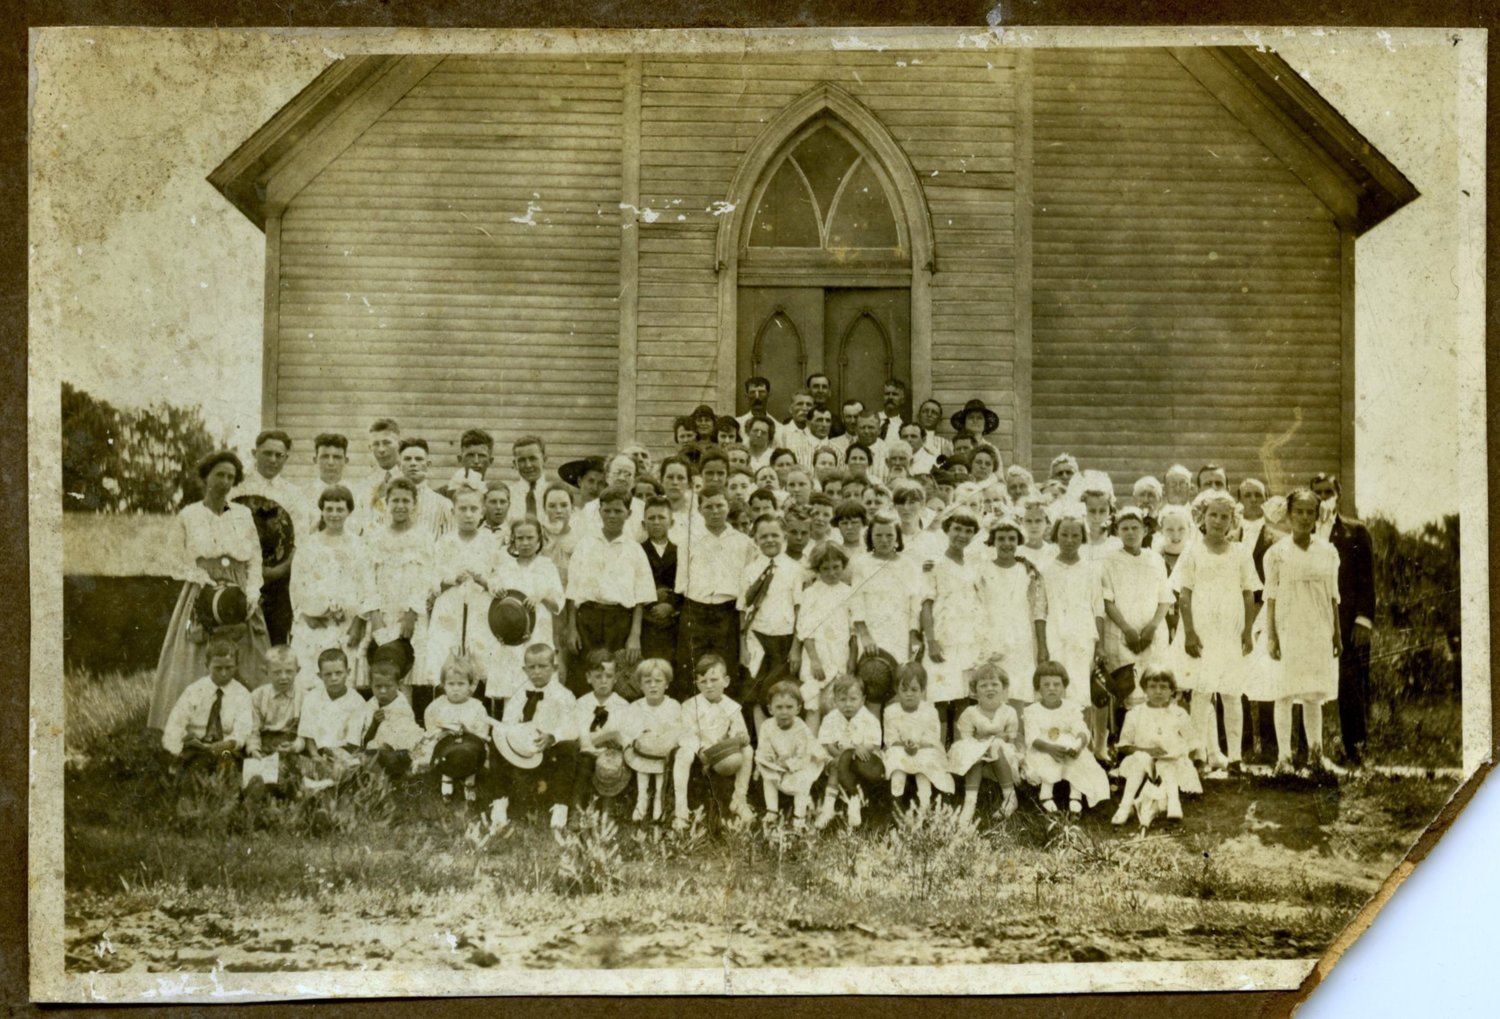 An undated photo shows a gathering at the old Methodist Church in Higbee. The church burned down April 7, 1927 after being struck by lightning, according to a 1971 article in the Monitor-Index.